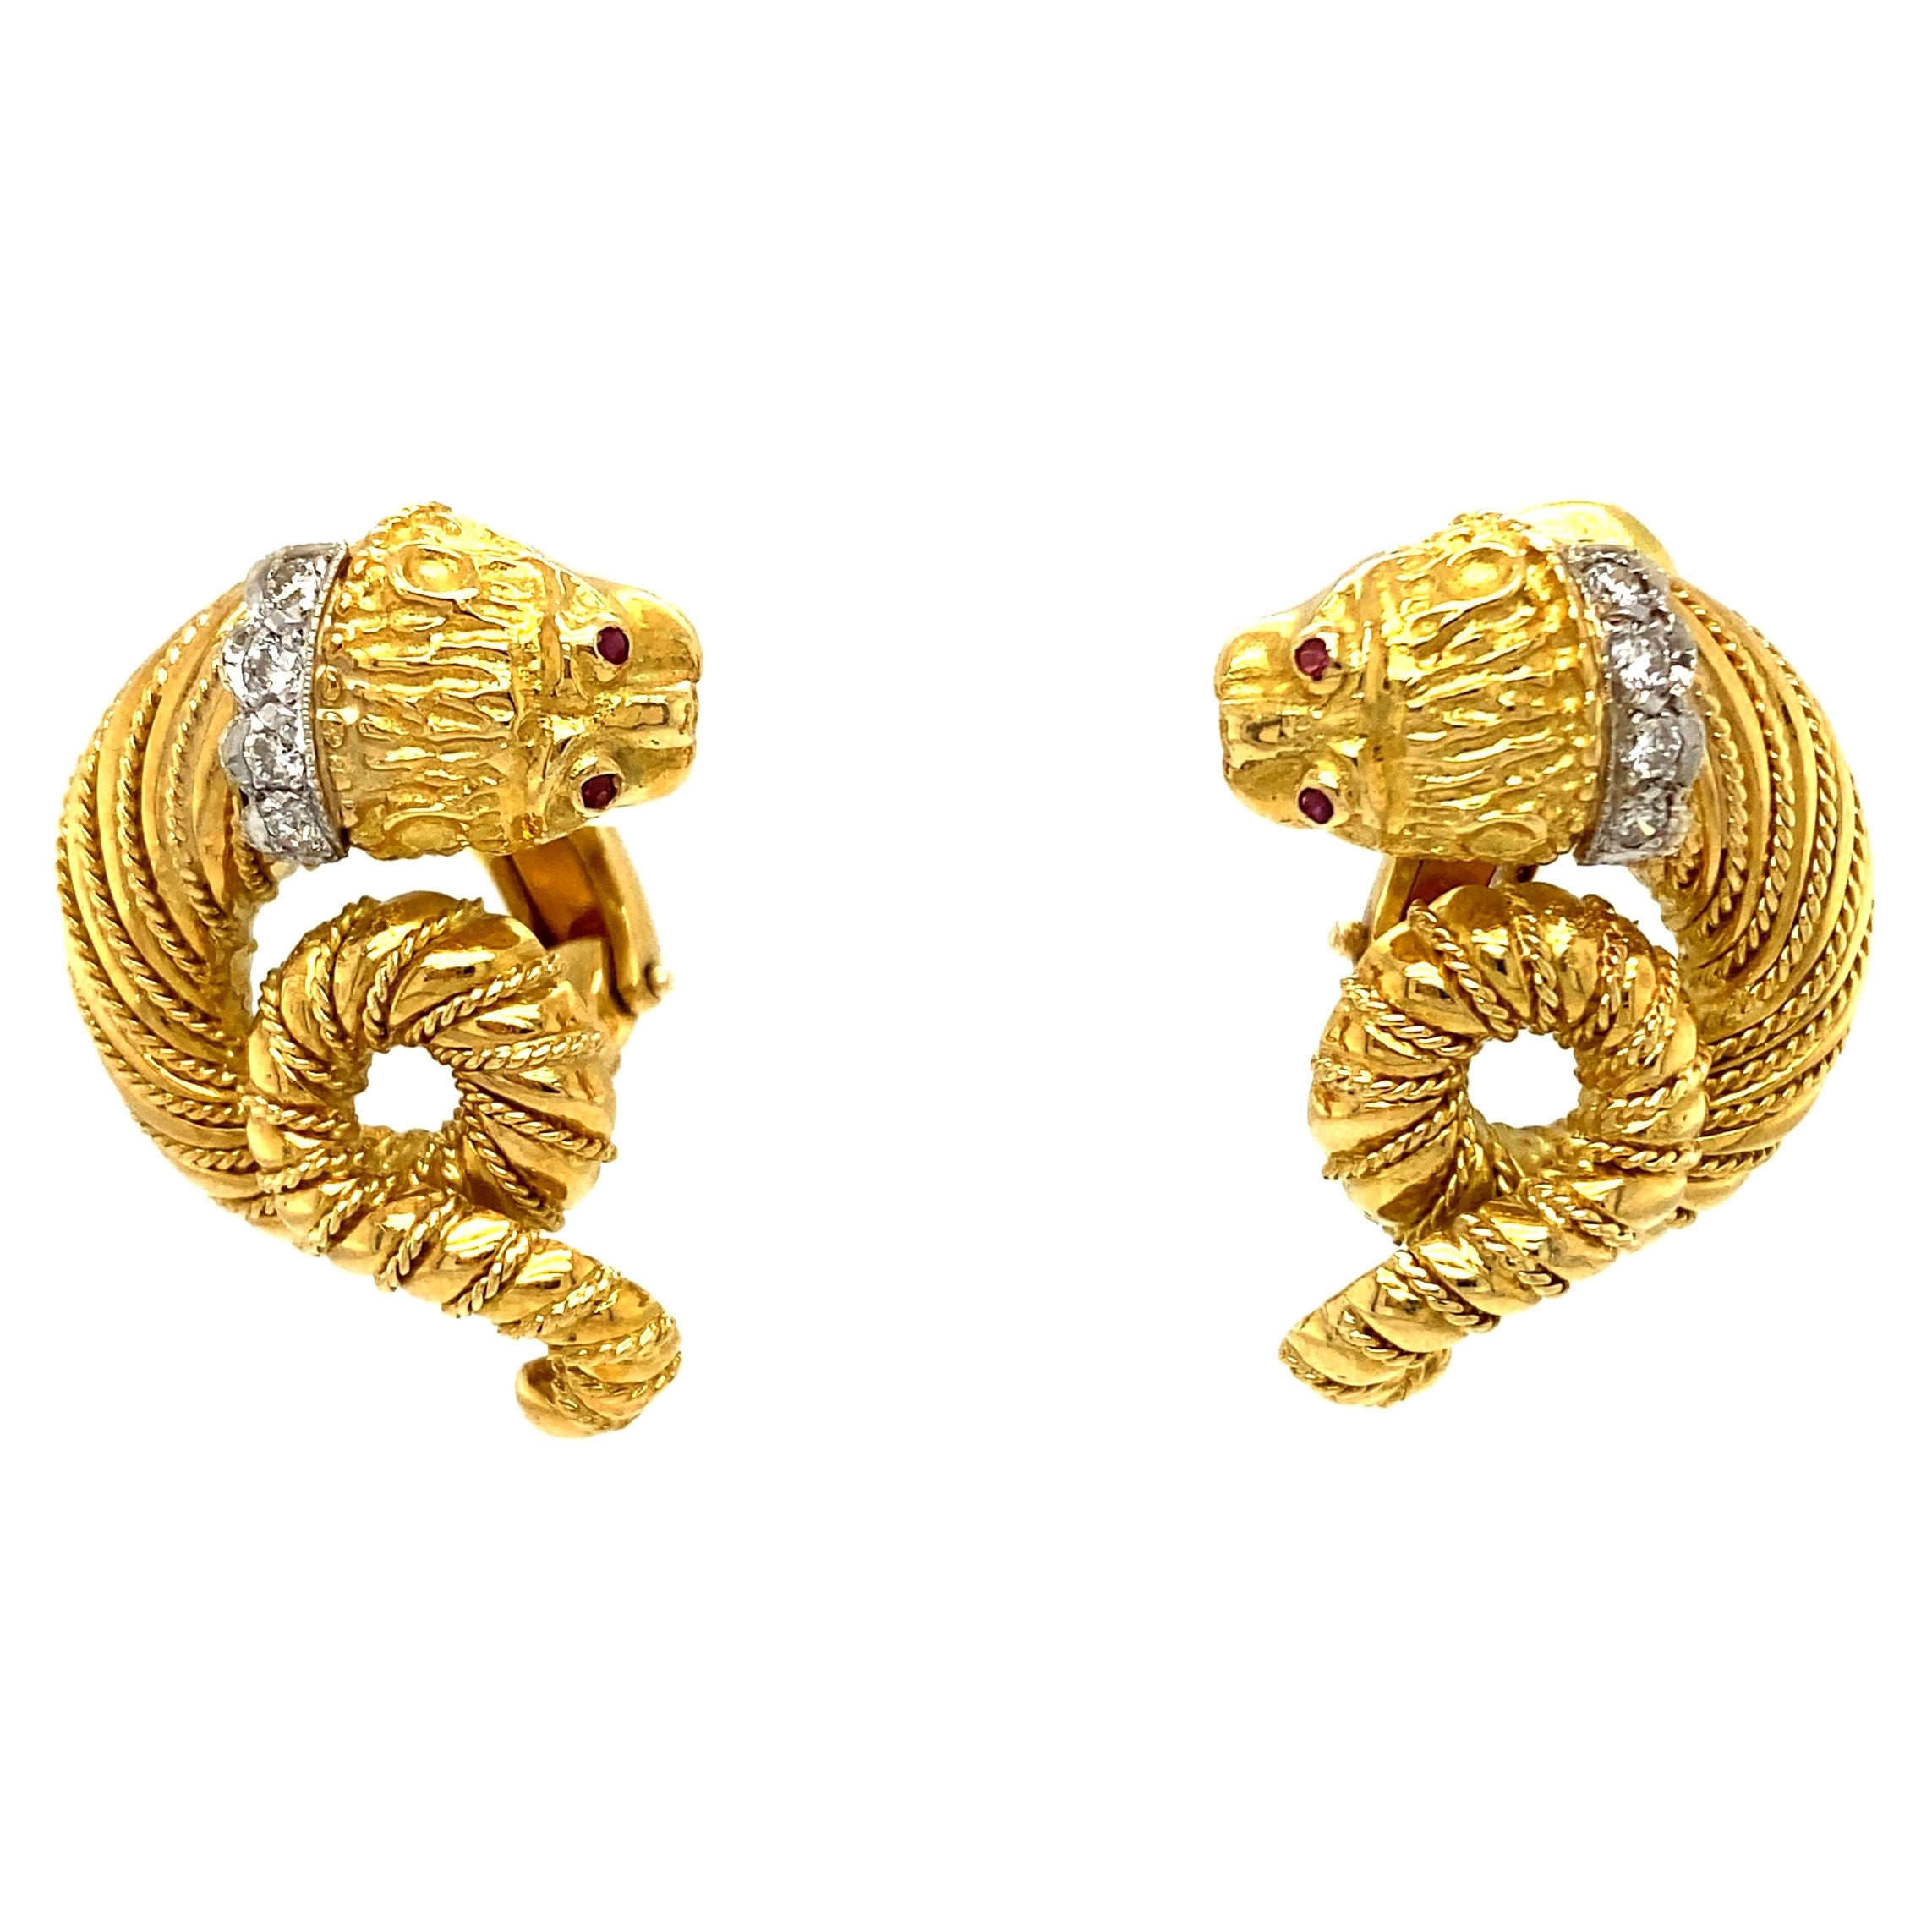 Awesome Vintage Chinese Dragon 18K Yellow Gold Diamond and Ruby Earrings For Sale